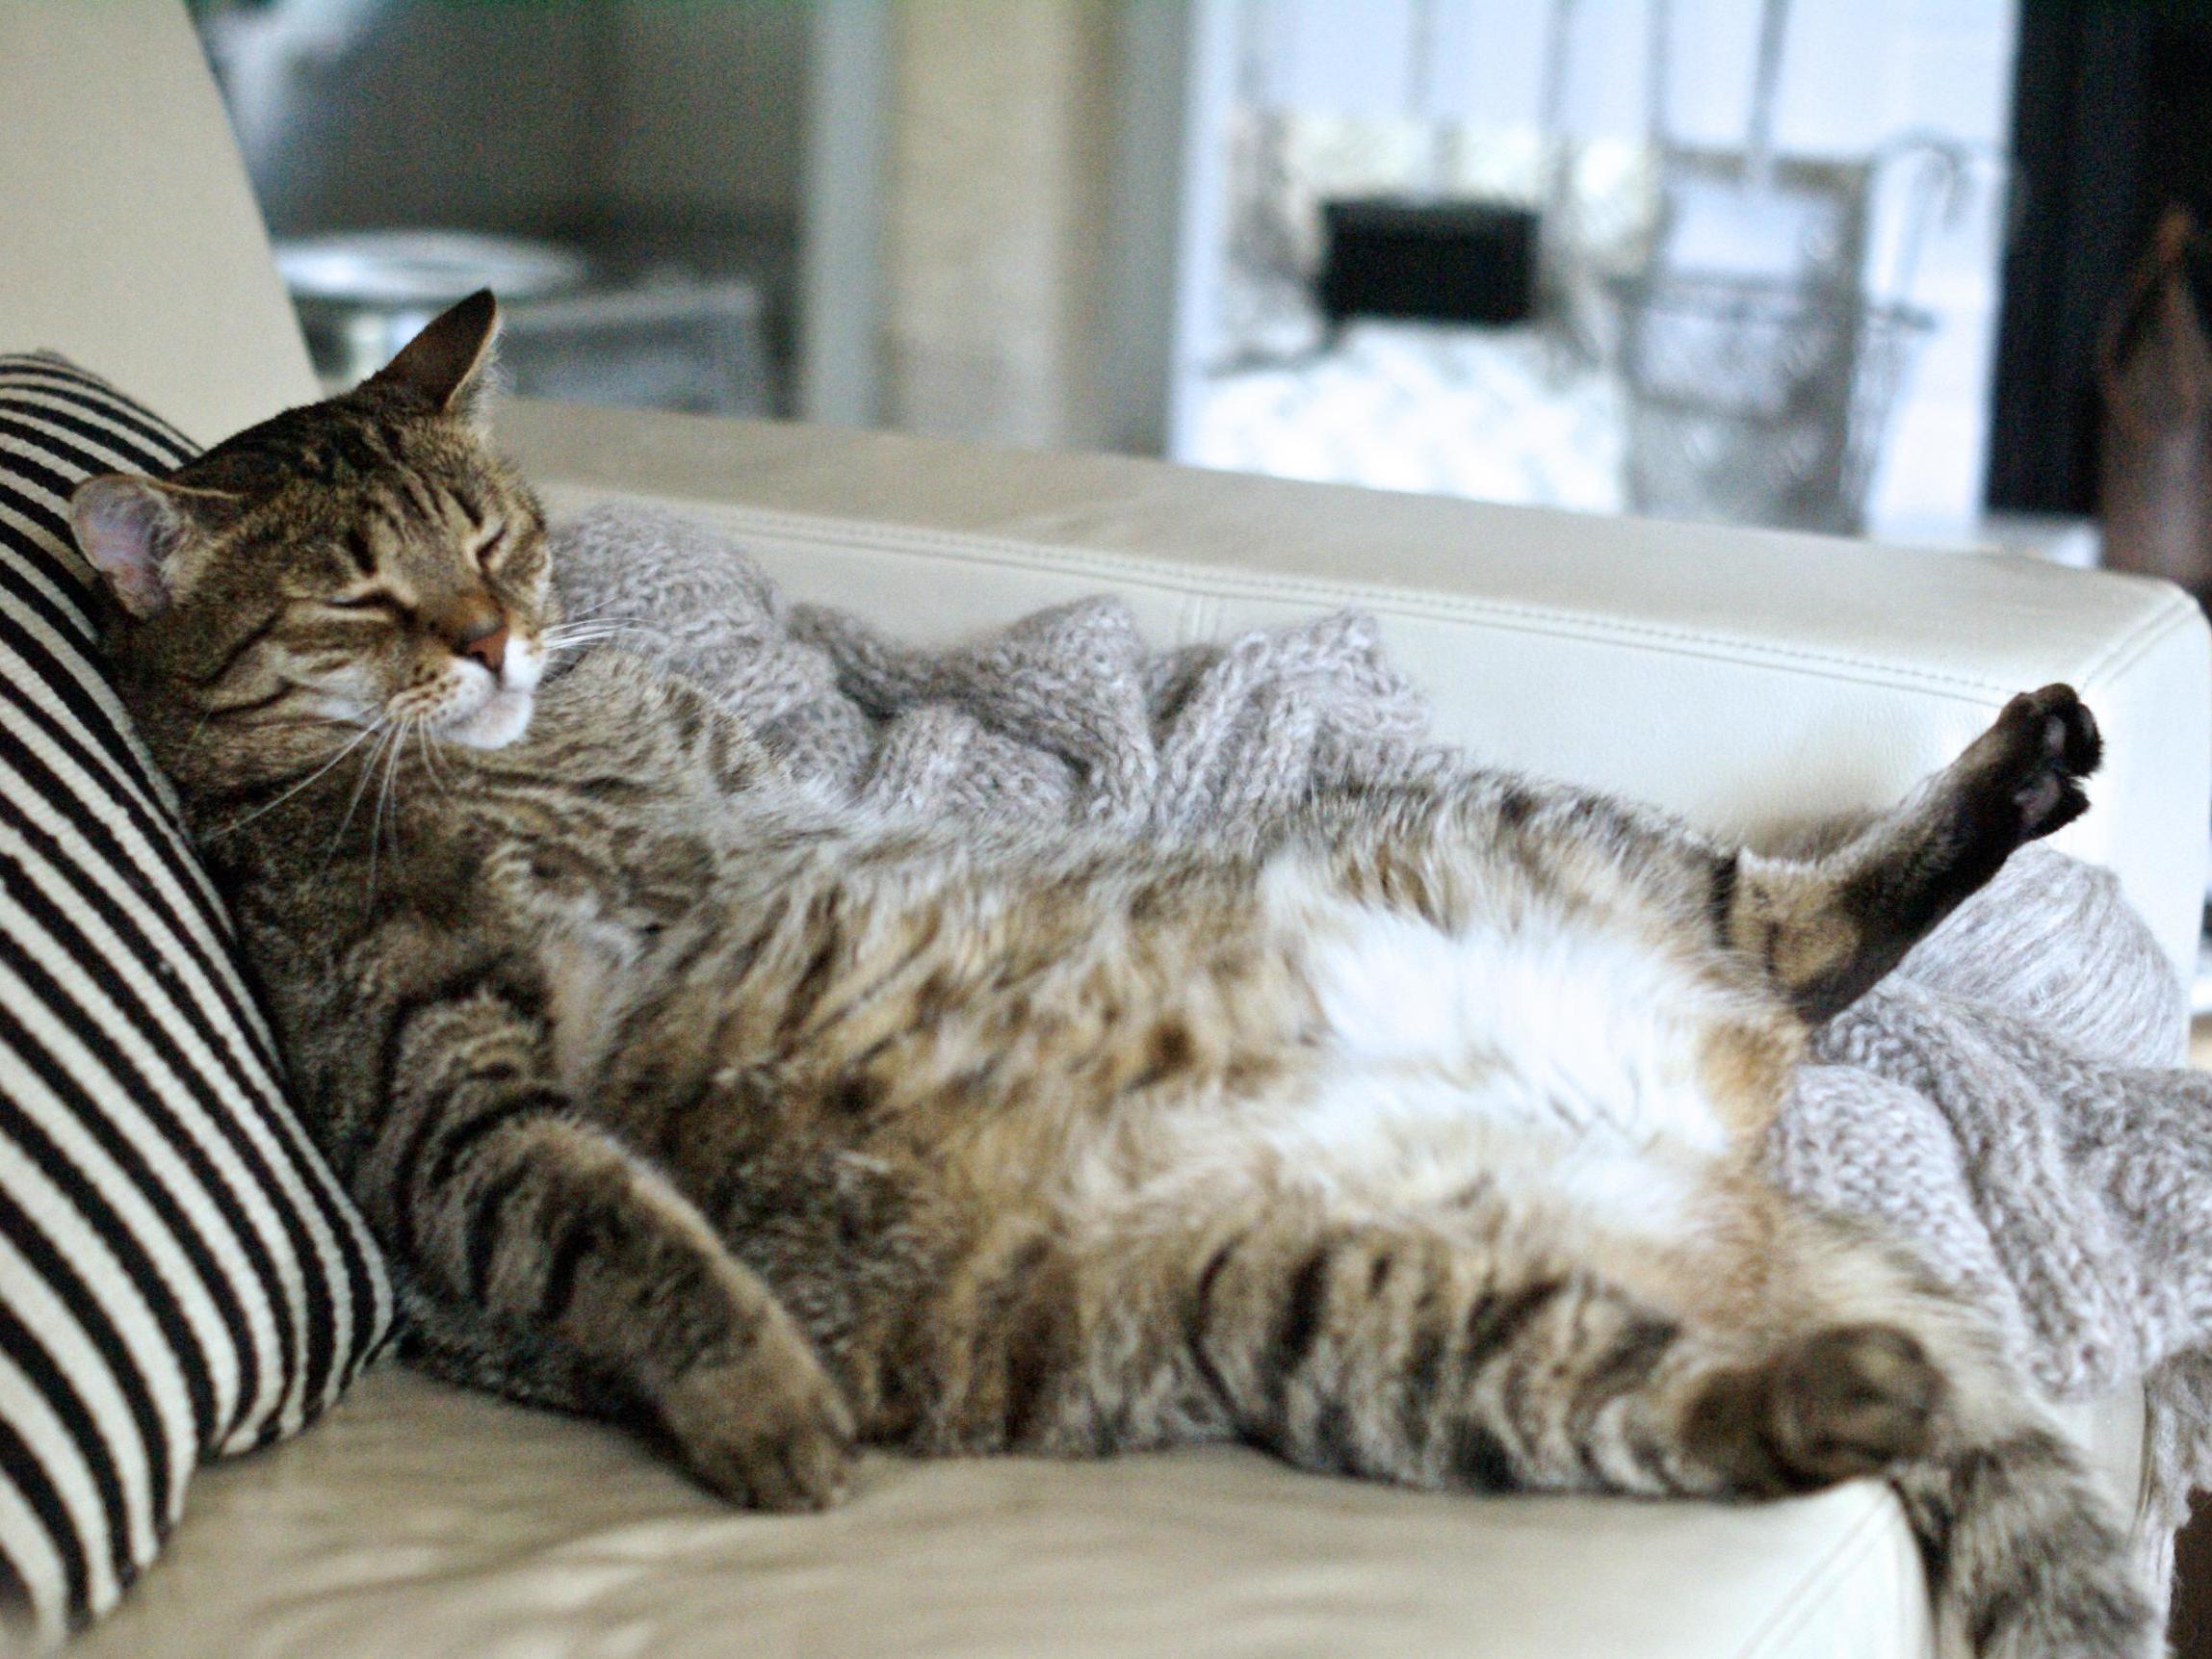 Obese pets: Millions of cats and dogs in the UK now considered overweight